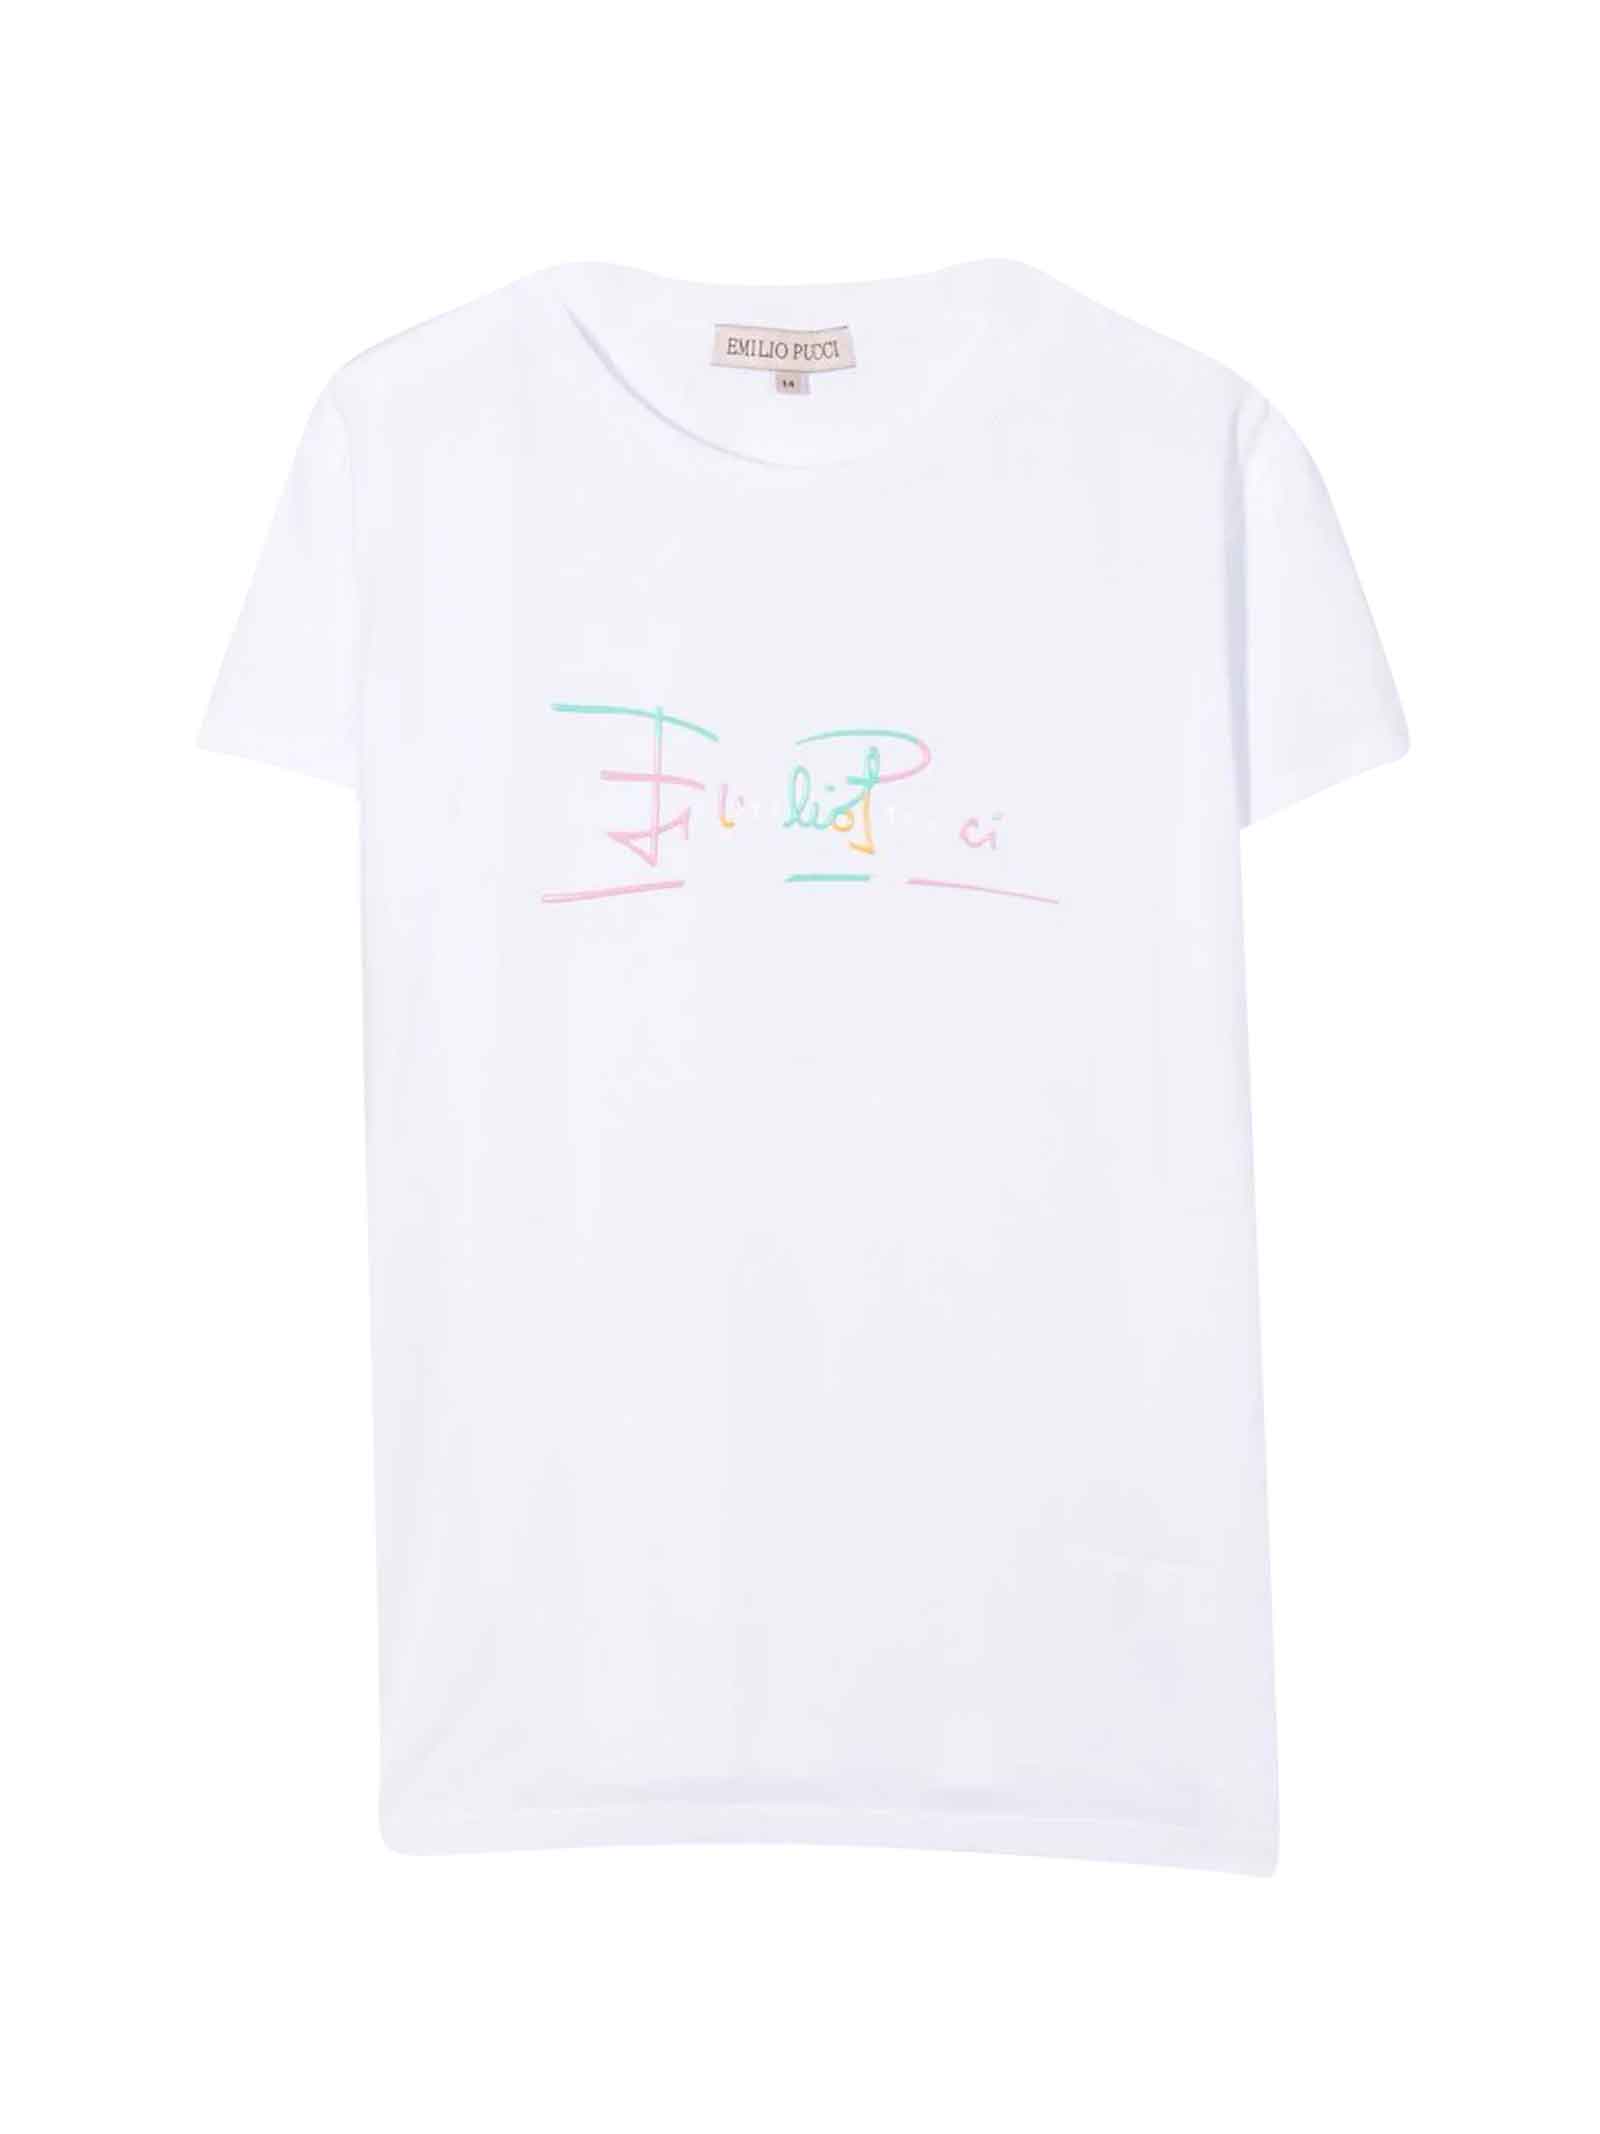 Emilio Pucci White T-shirt With Frontal Print